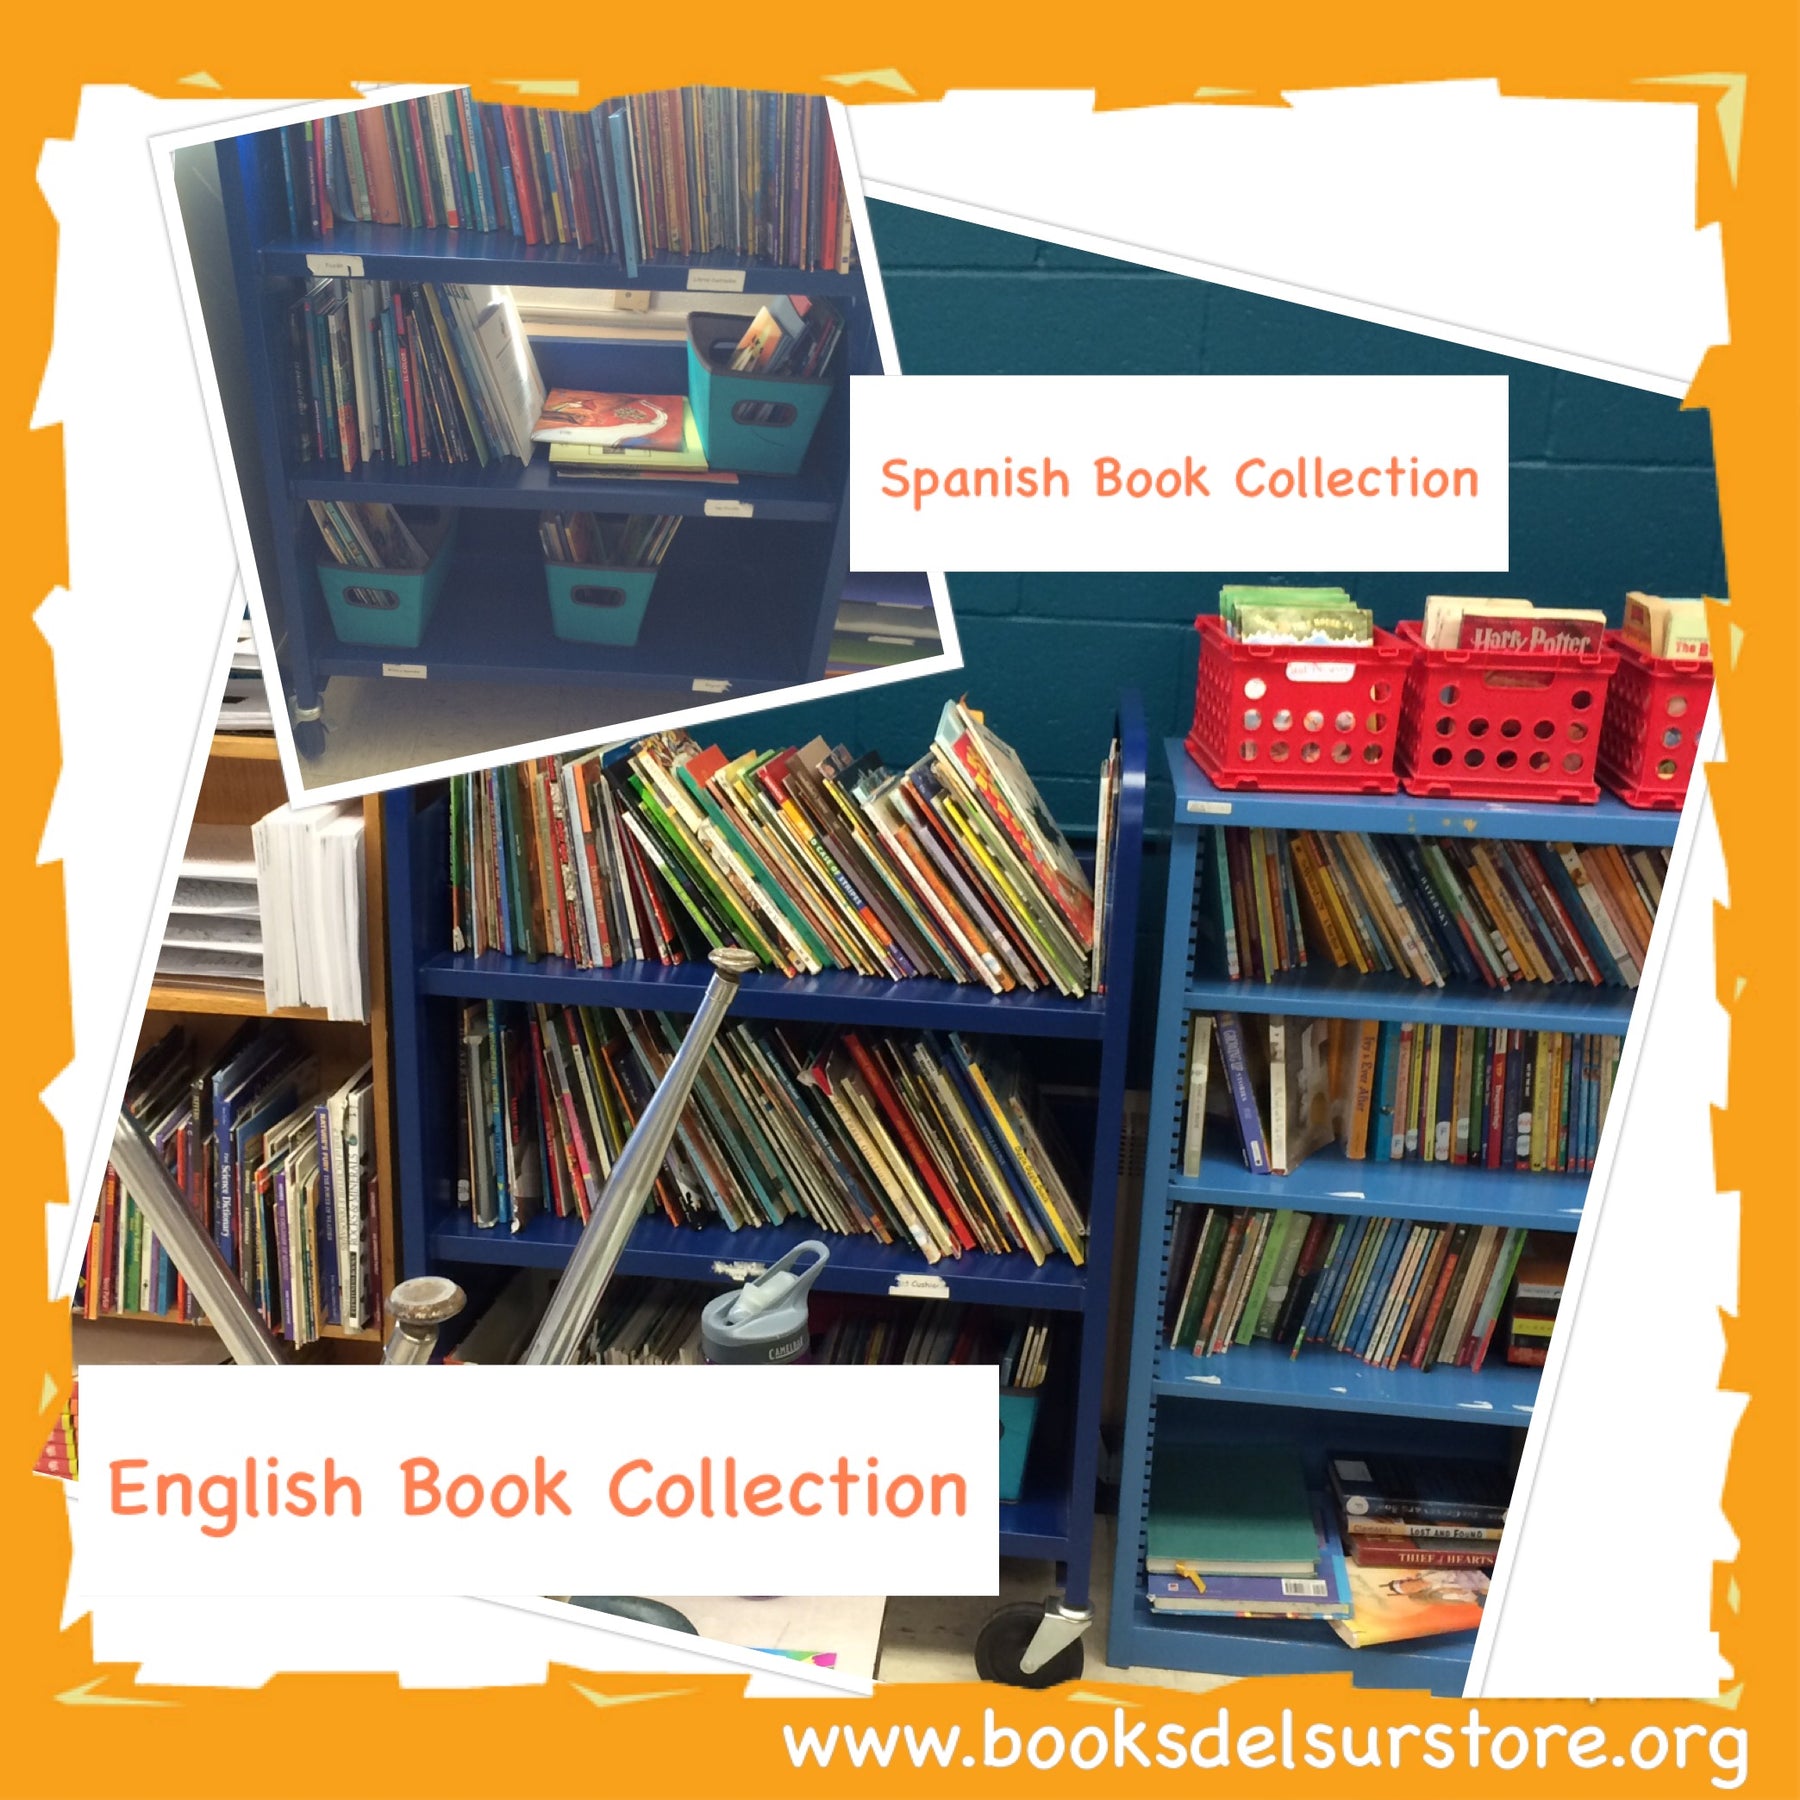 Spanish Book Collections on shelves